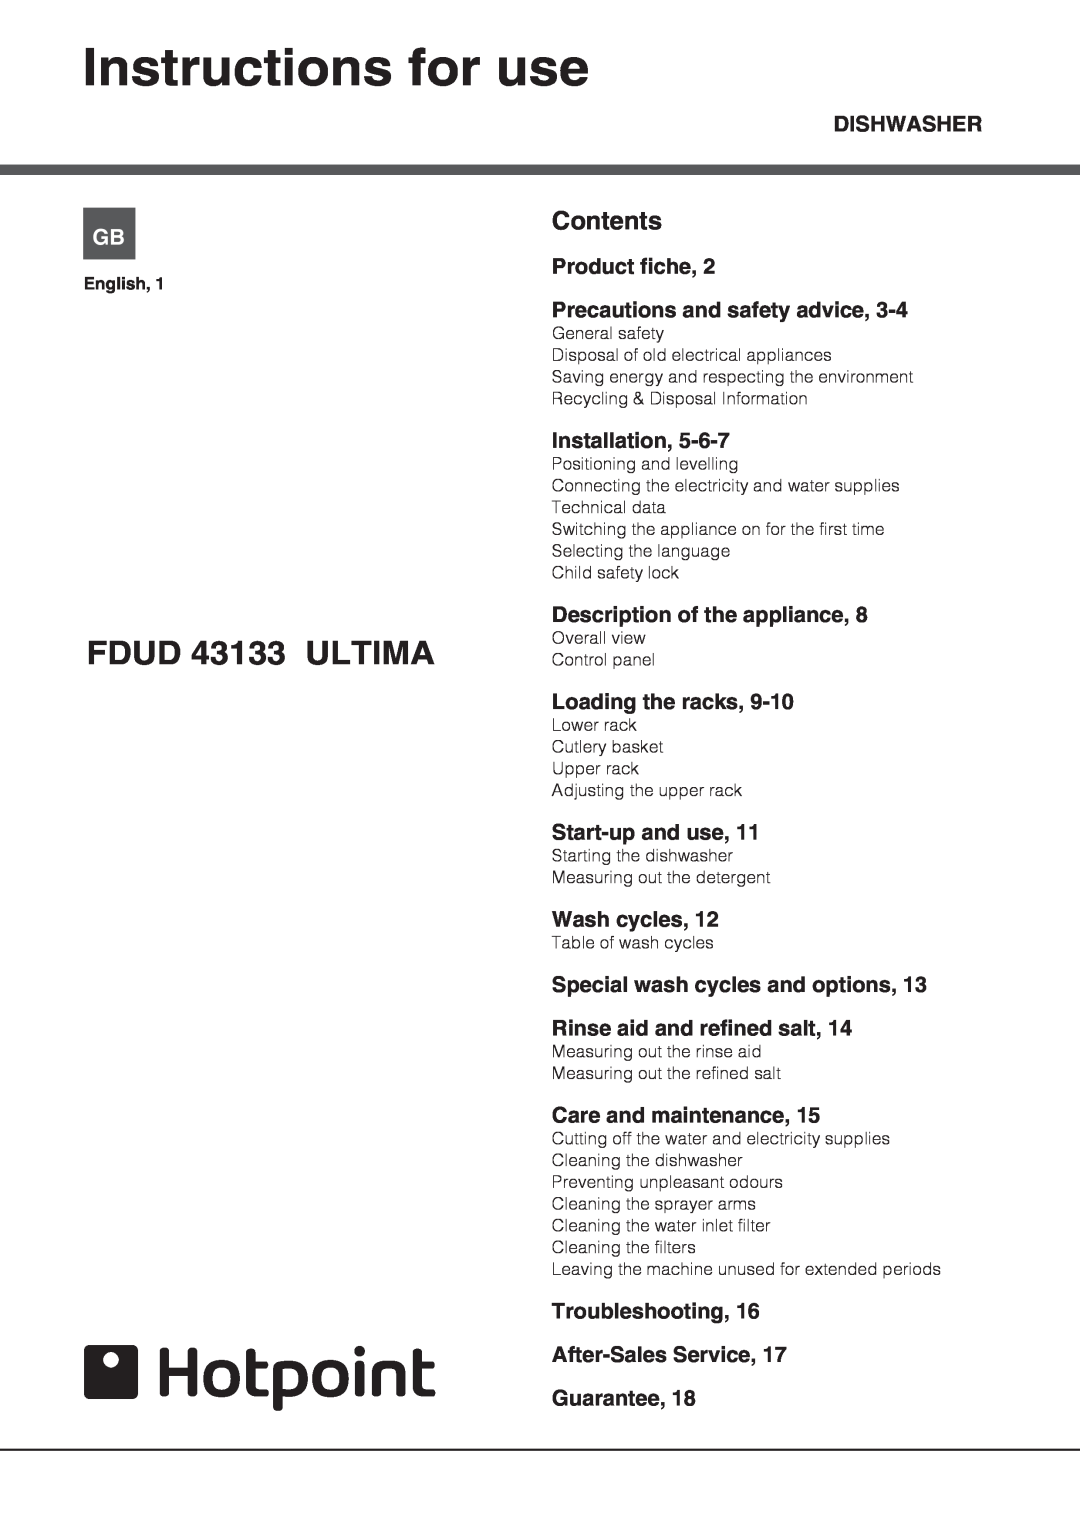 Hotpoint manual Instructions for use, FDUD 43133 ULTIMA, Contents 